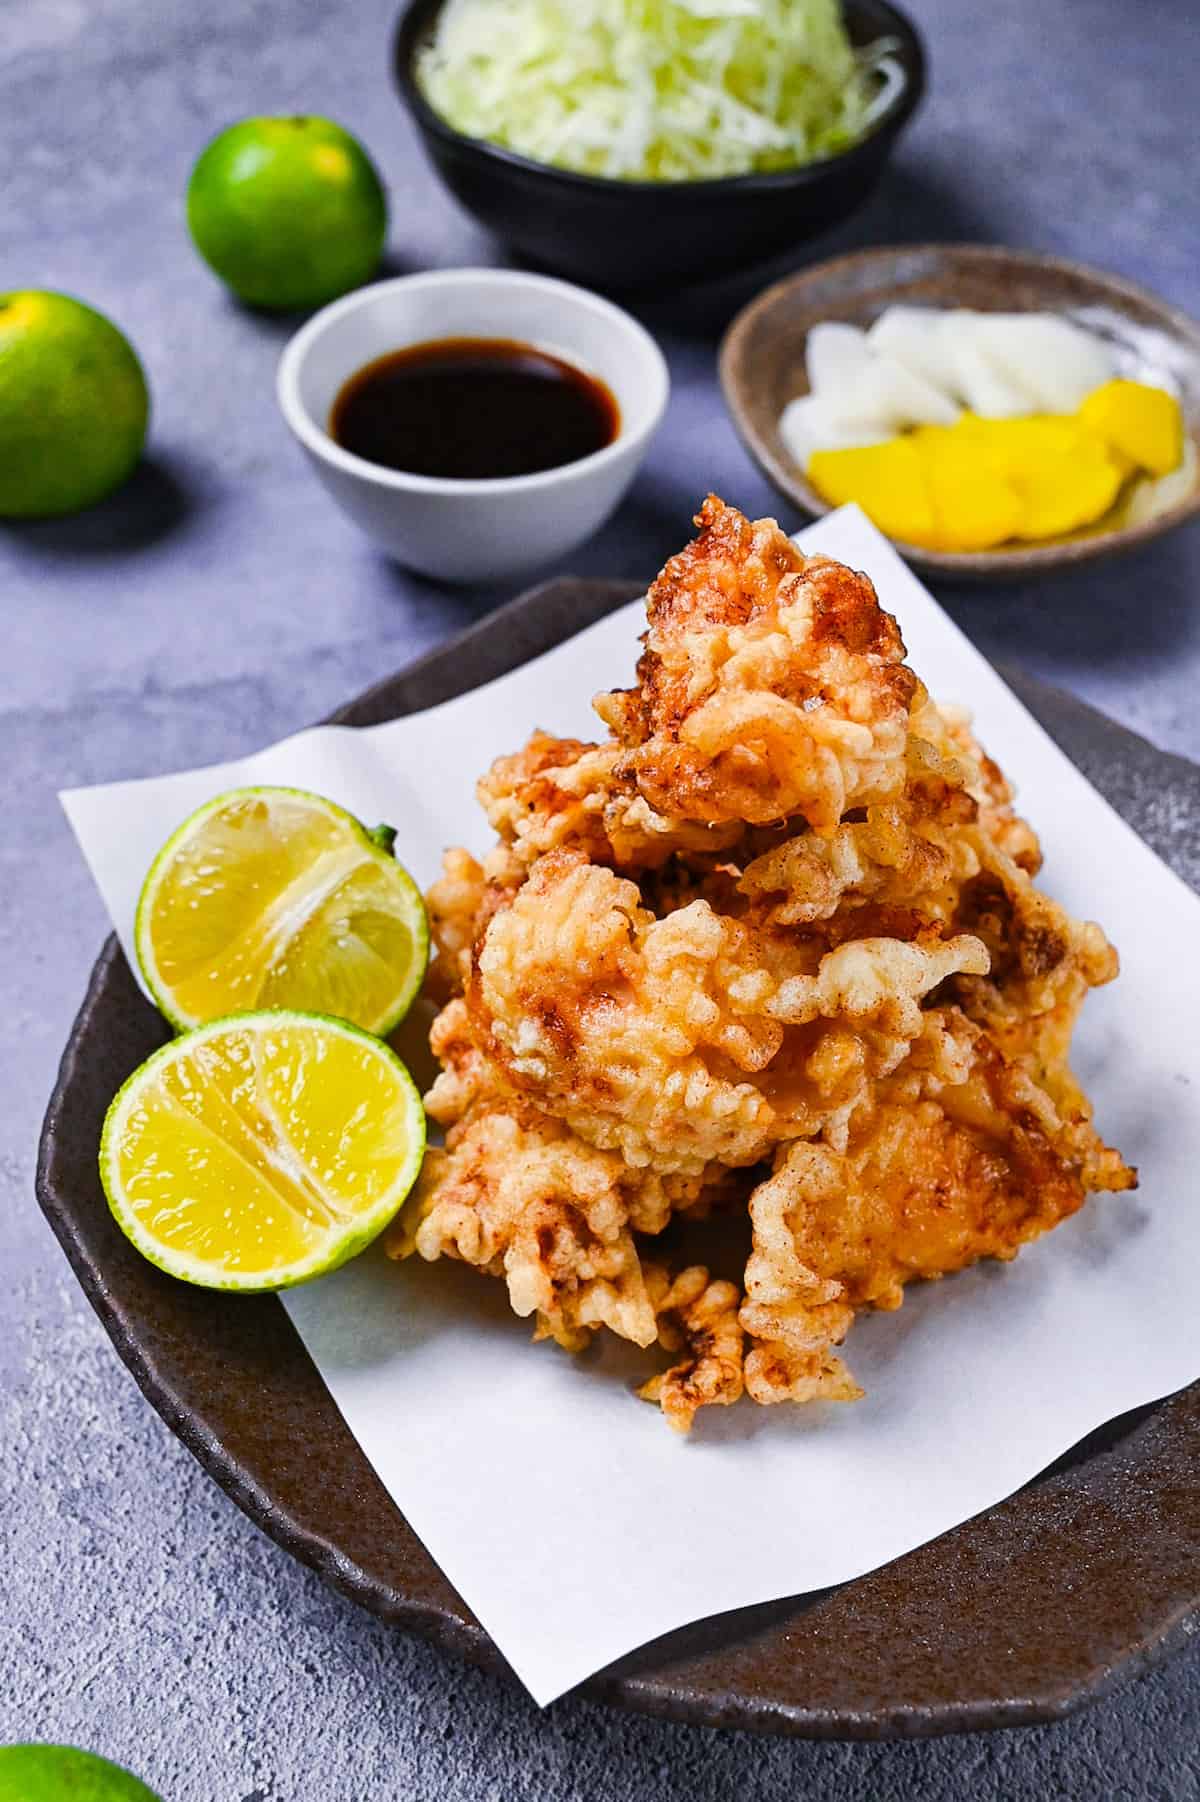 toriten (chicken tempura) piled up on a brown plate with two halves of kabosu citrus